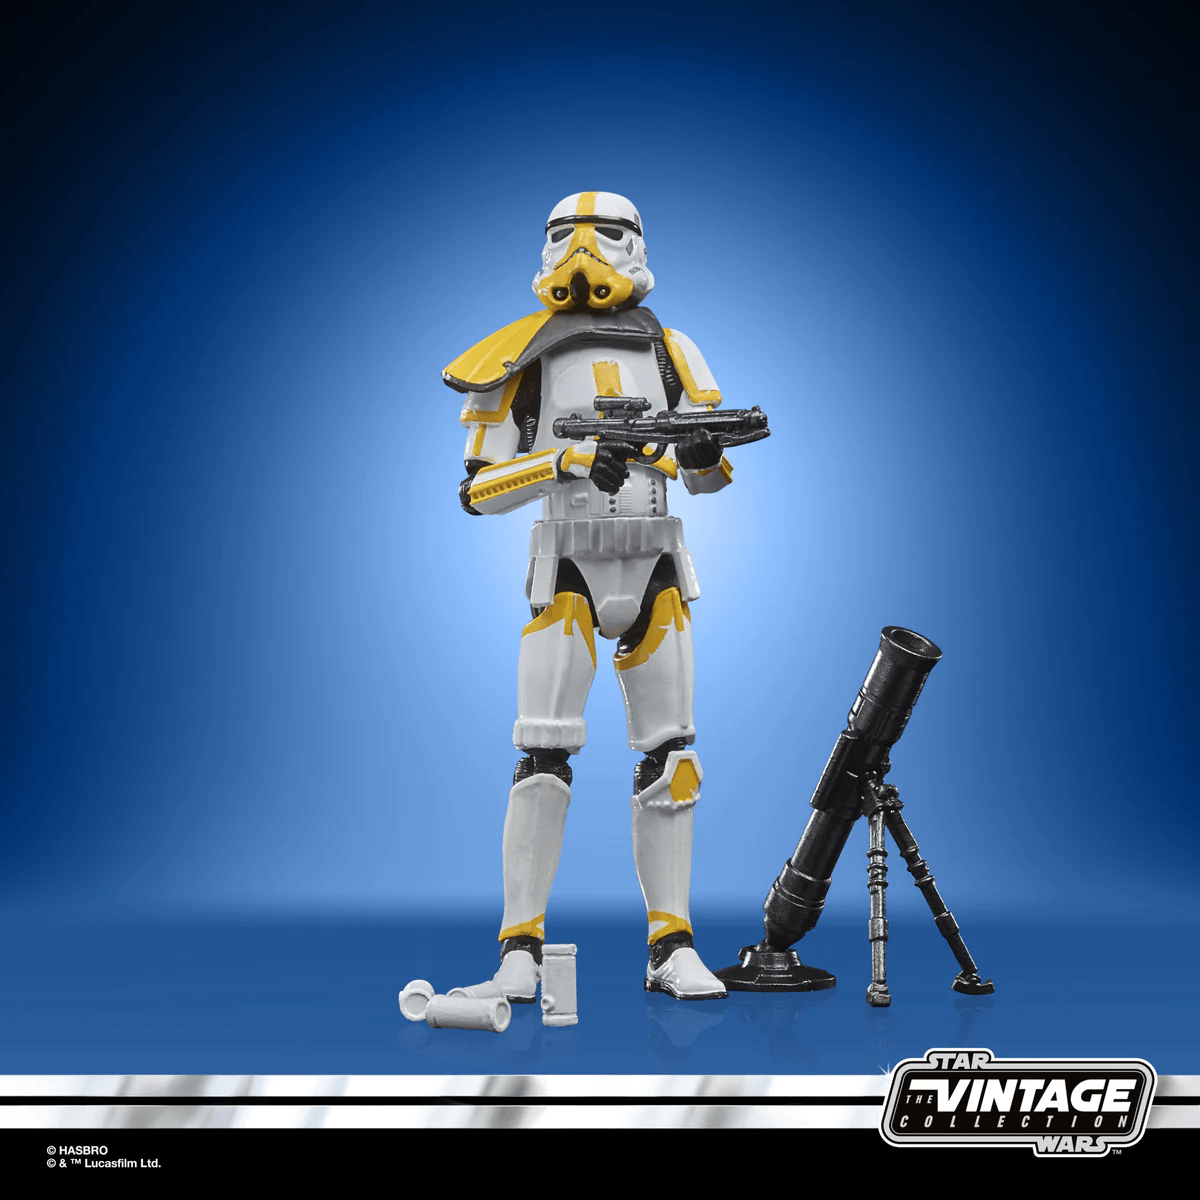 Hasbro Star Wars The Vintage Collection Artillery Stormtrooper Action Figure